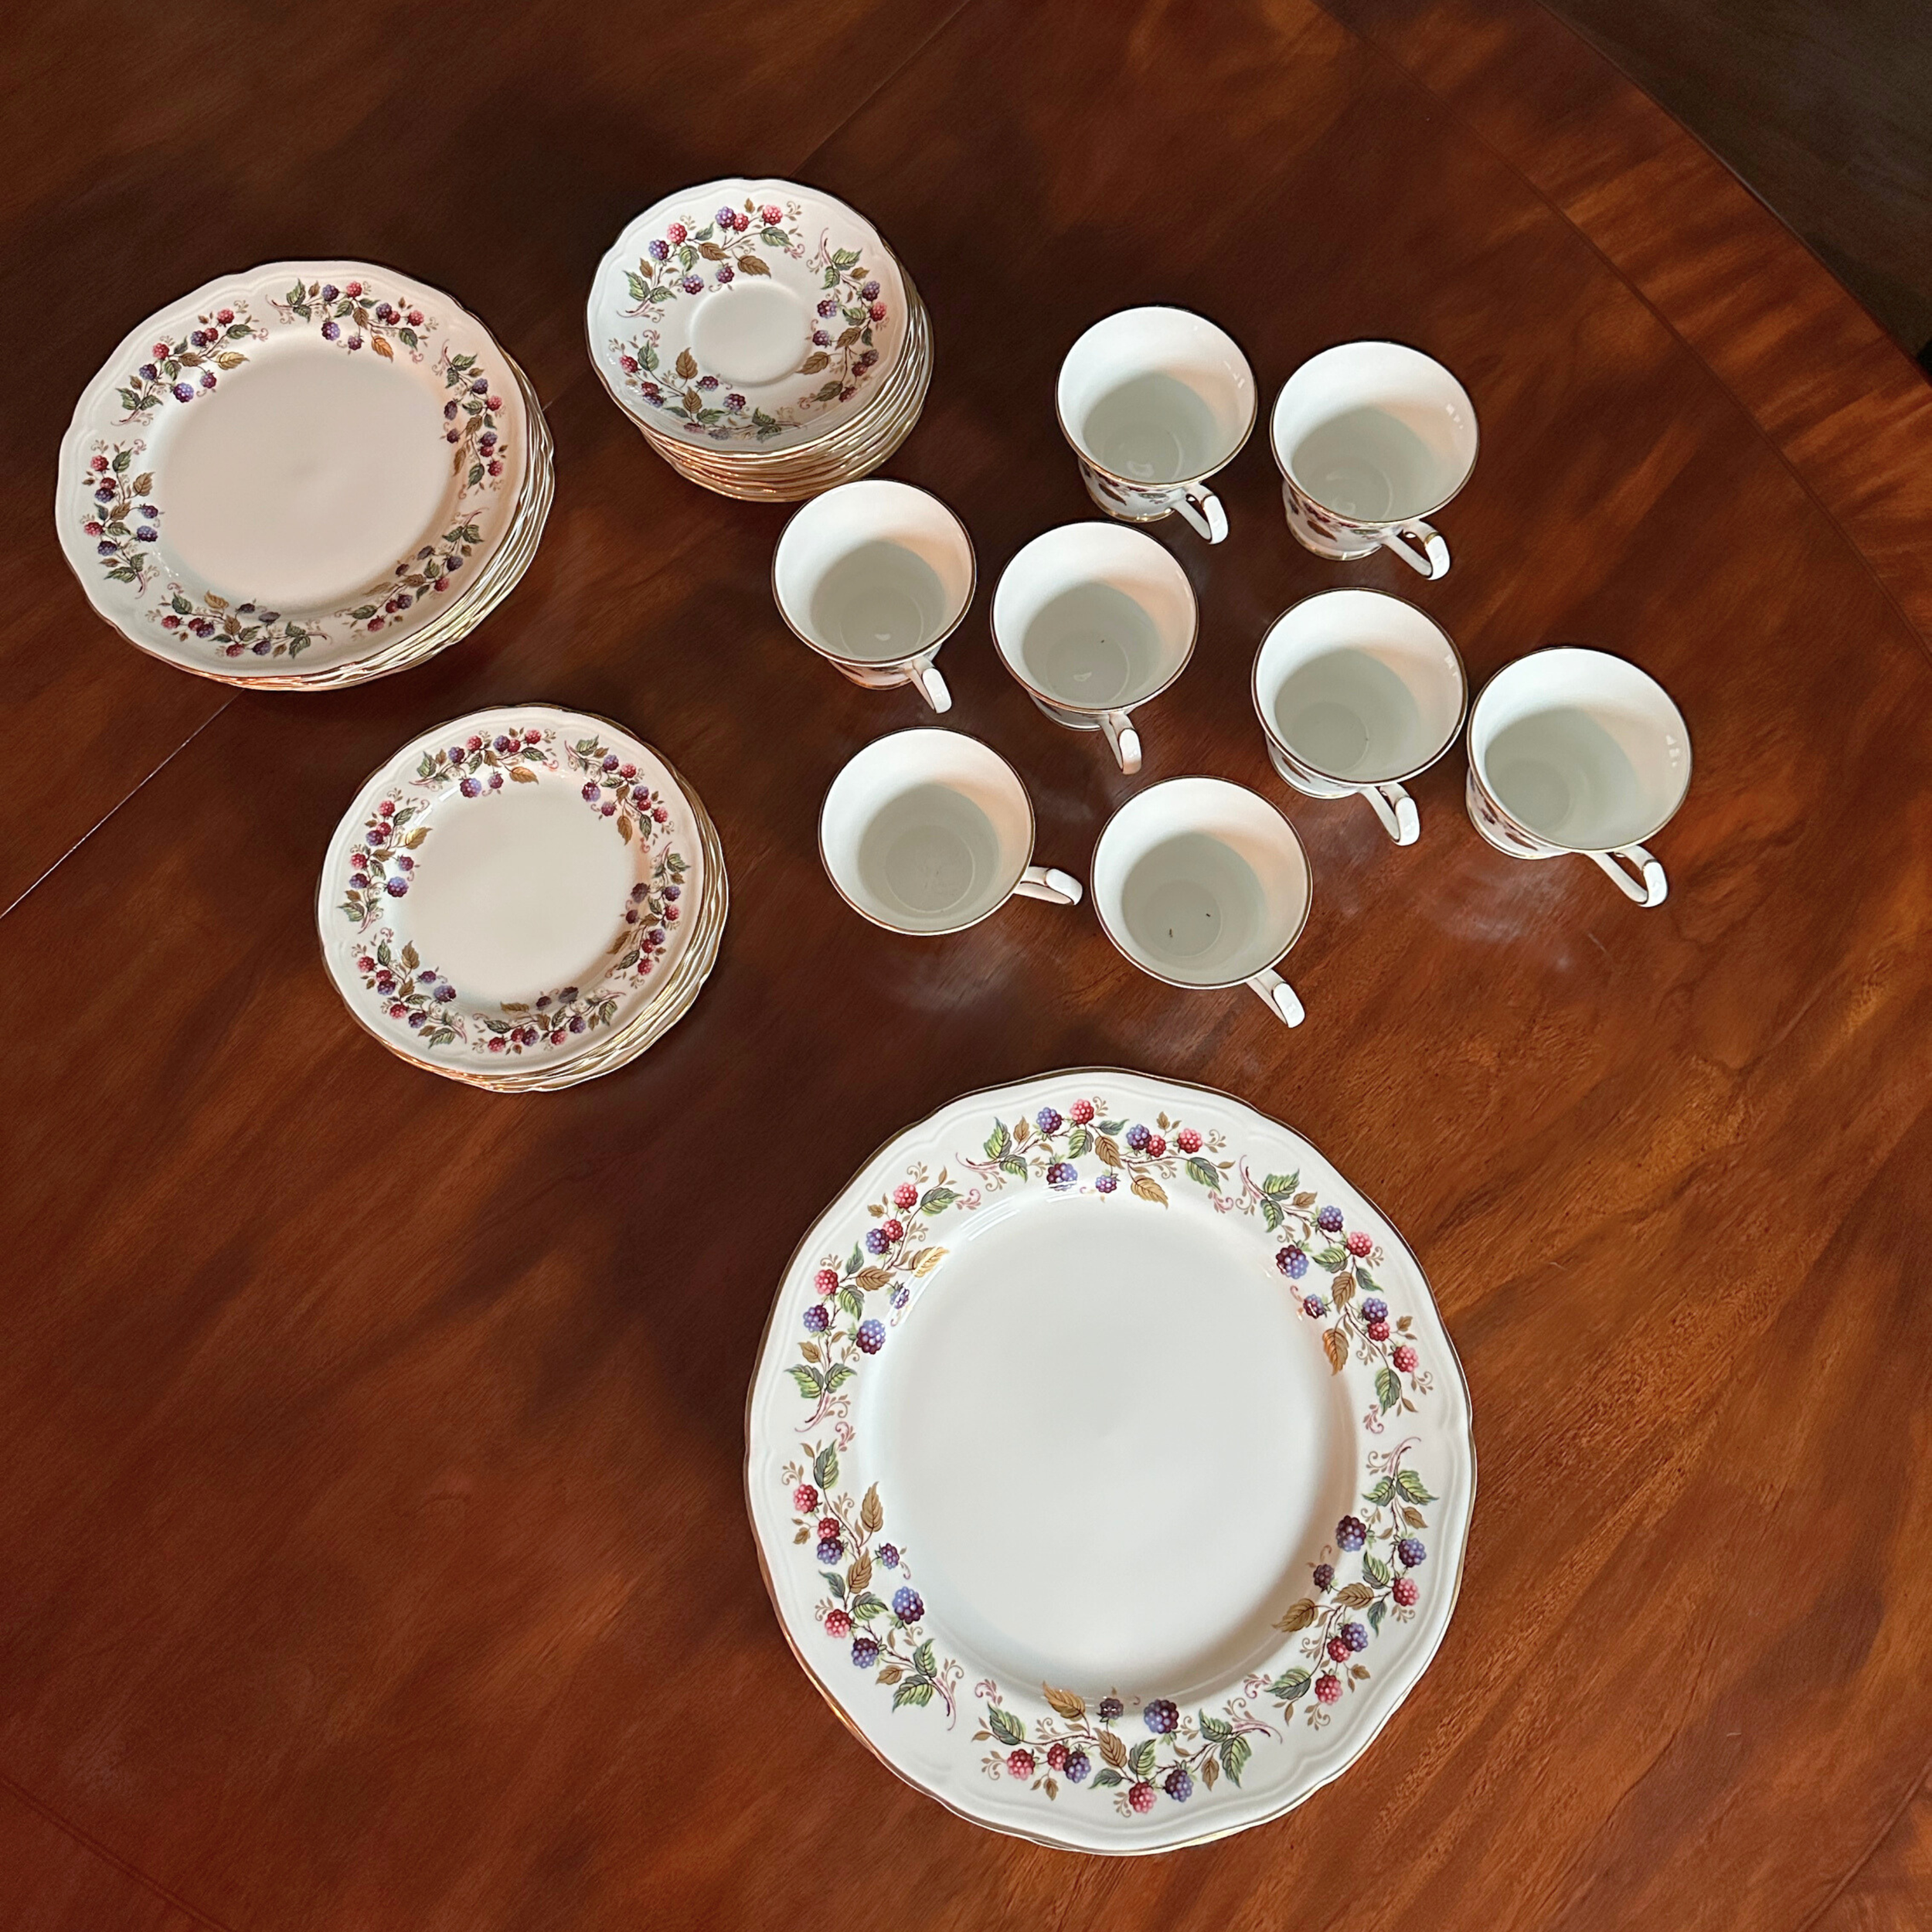 Ansley "Bramble Time" China, Service for 8